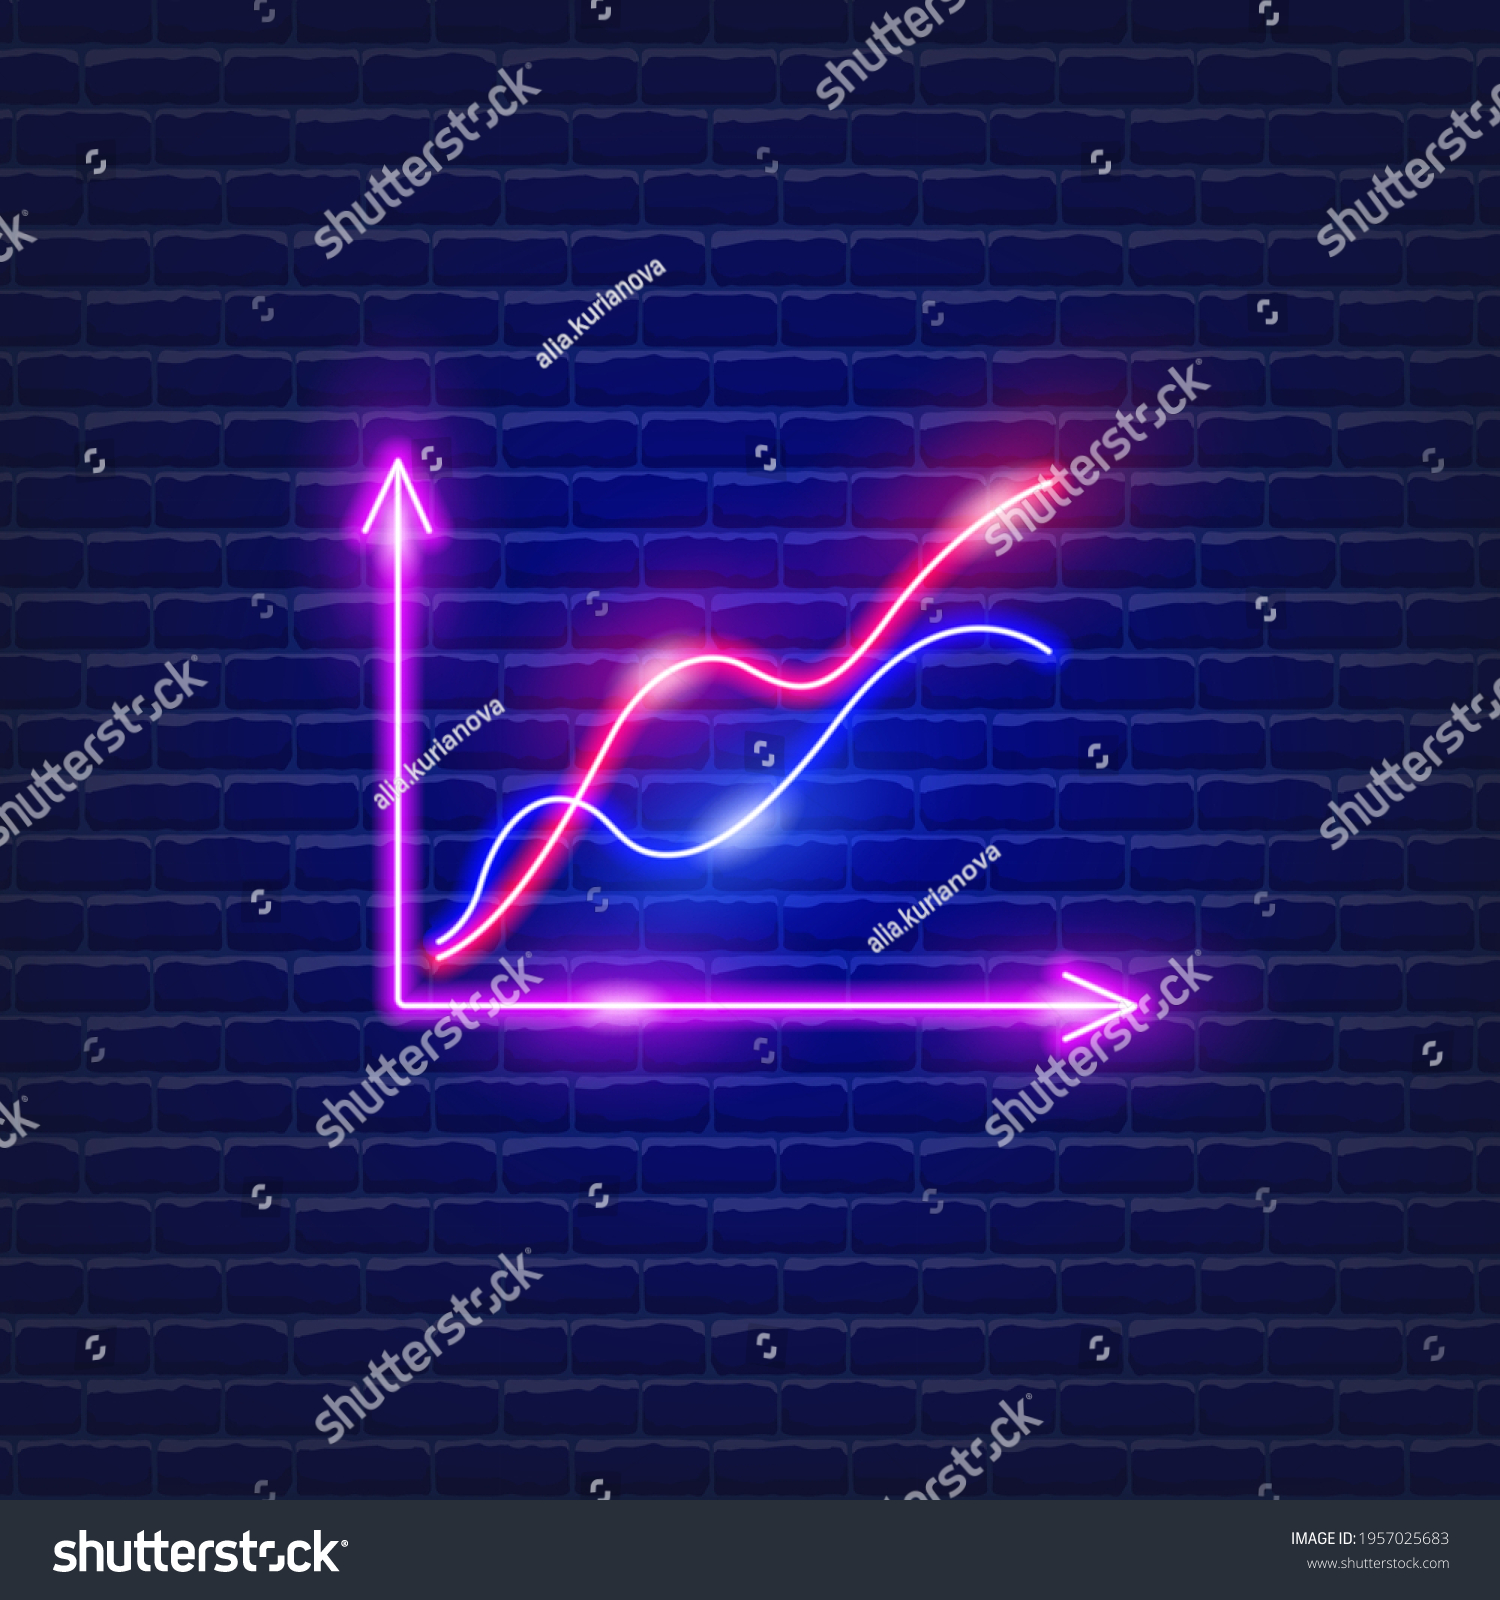 SVG of Graph neon icon. Vector illustration for design website, advertising, promotion, banner. Analysis and statistics concept. svg